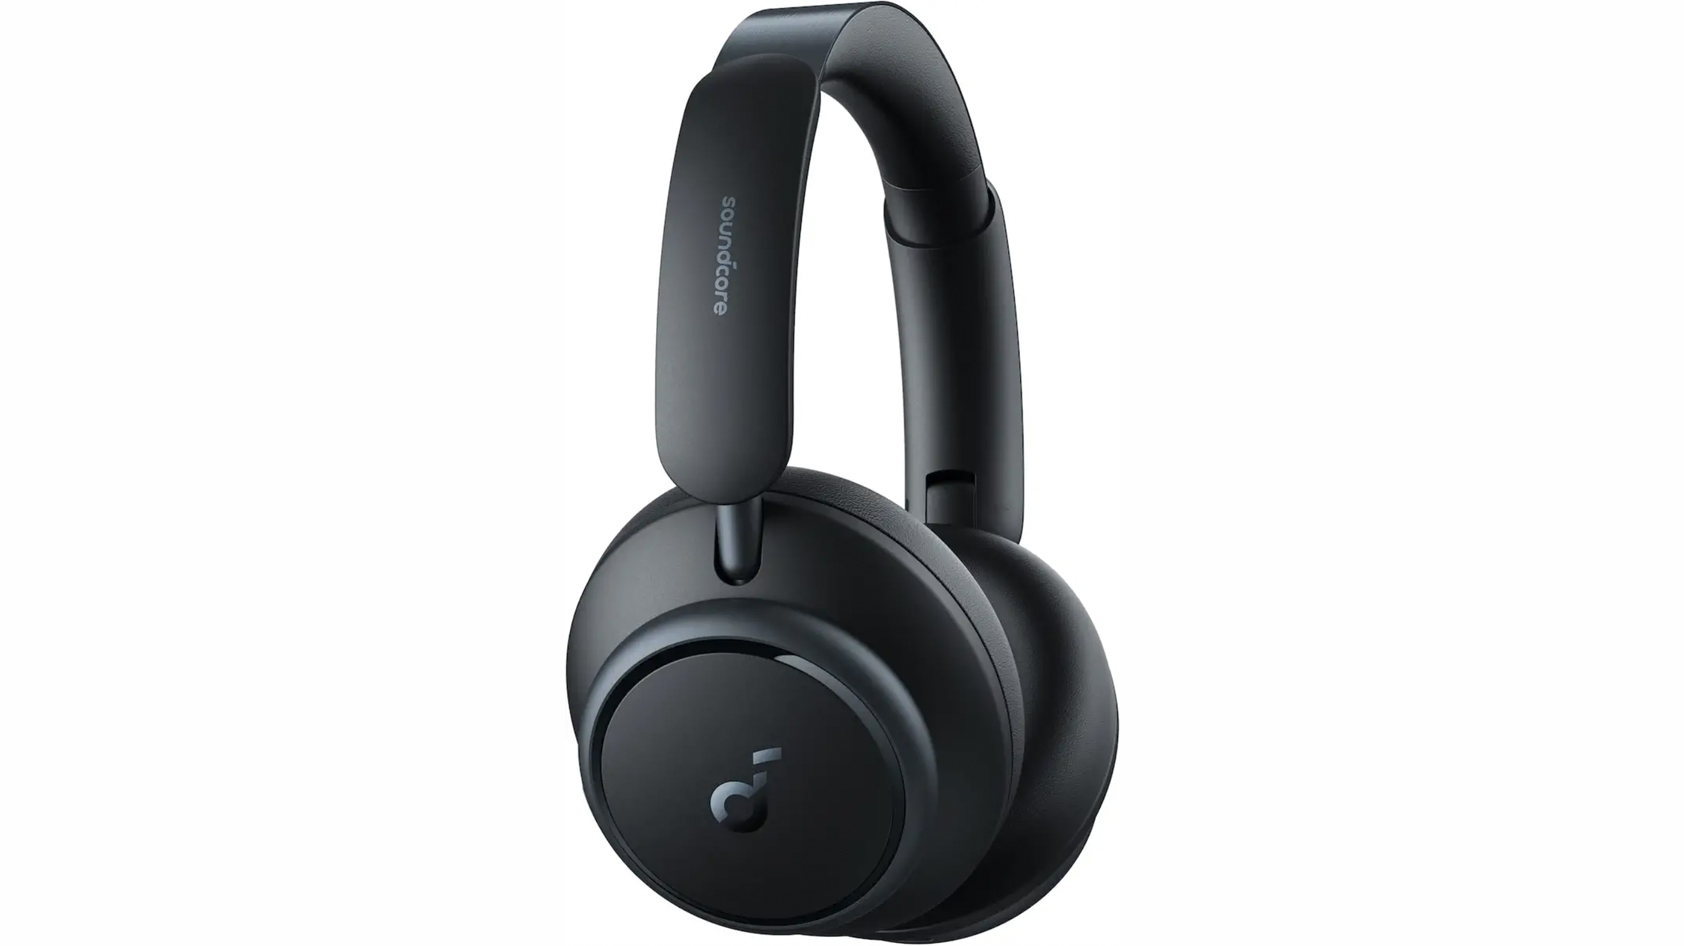 The Anker Soundcore Space Q45 over-ear noise canceling headphones in black against a white background.